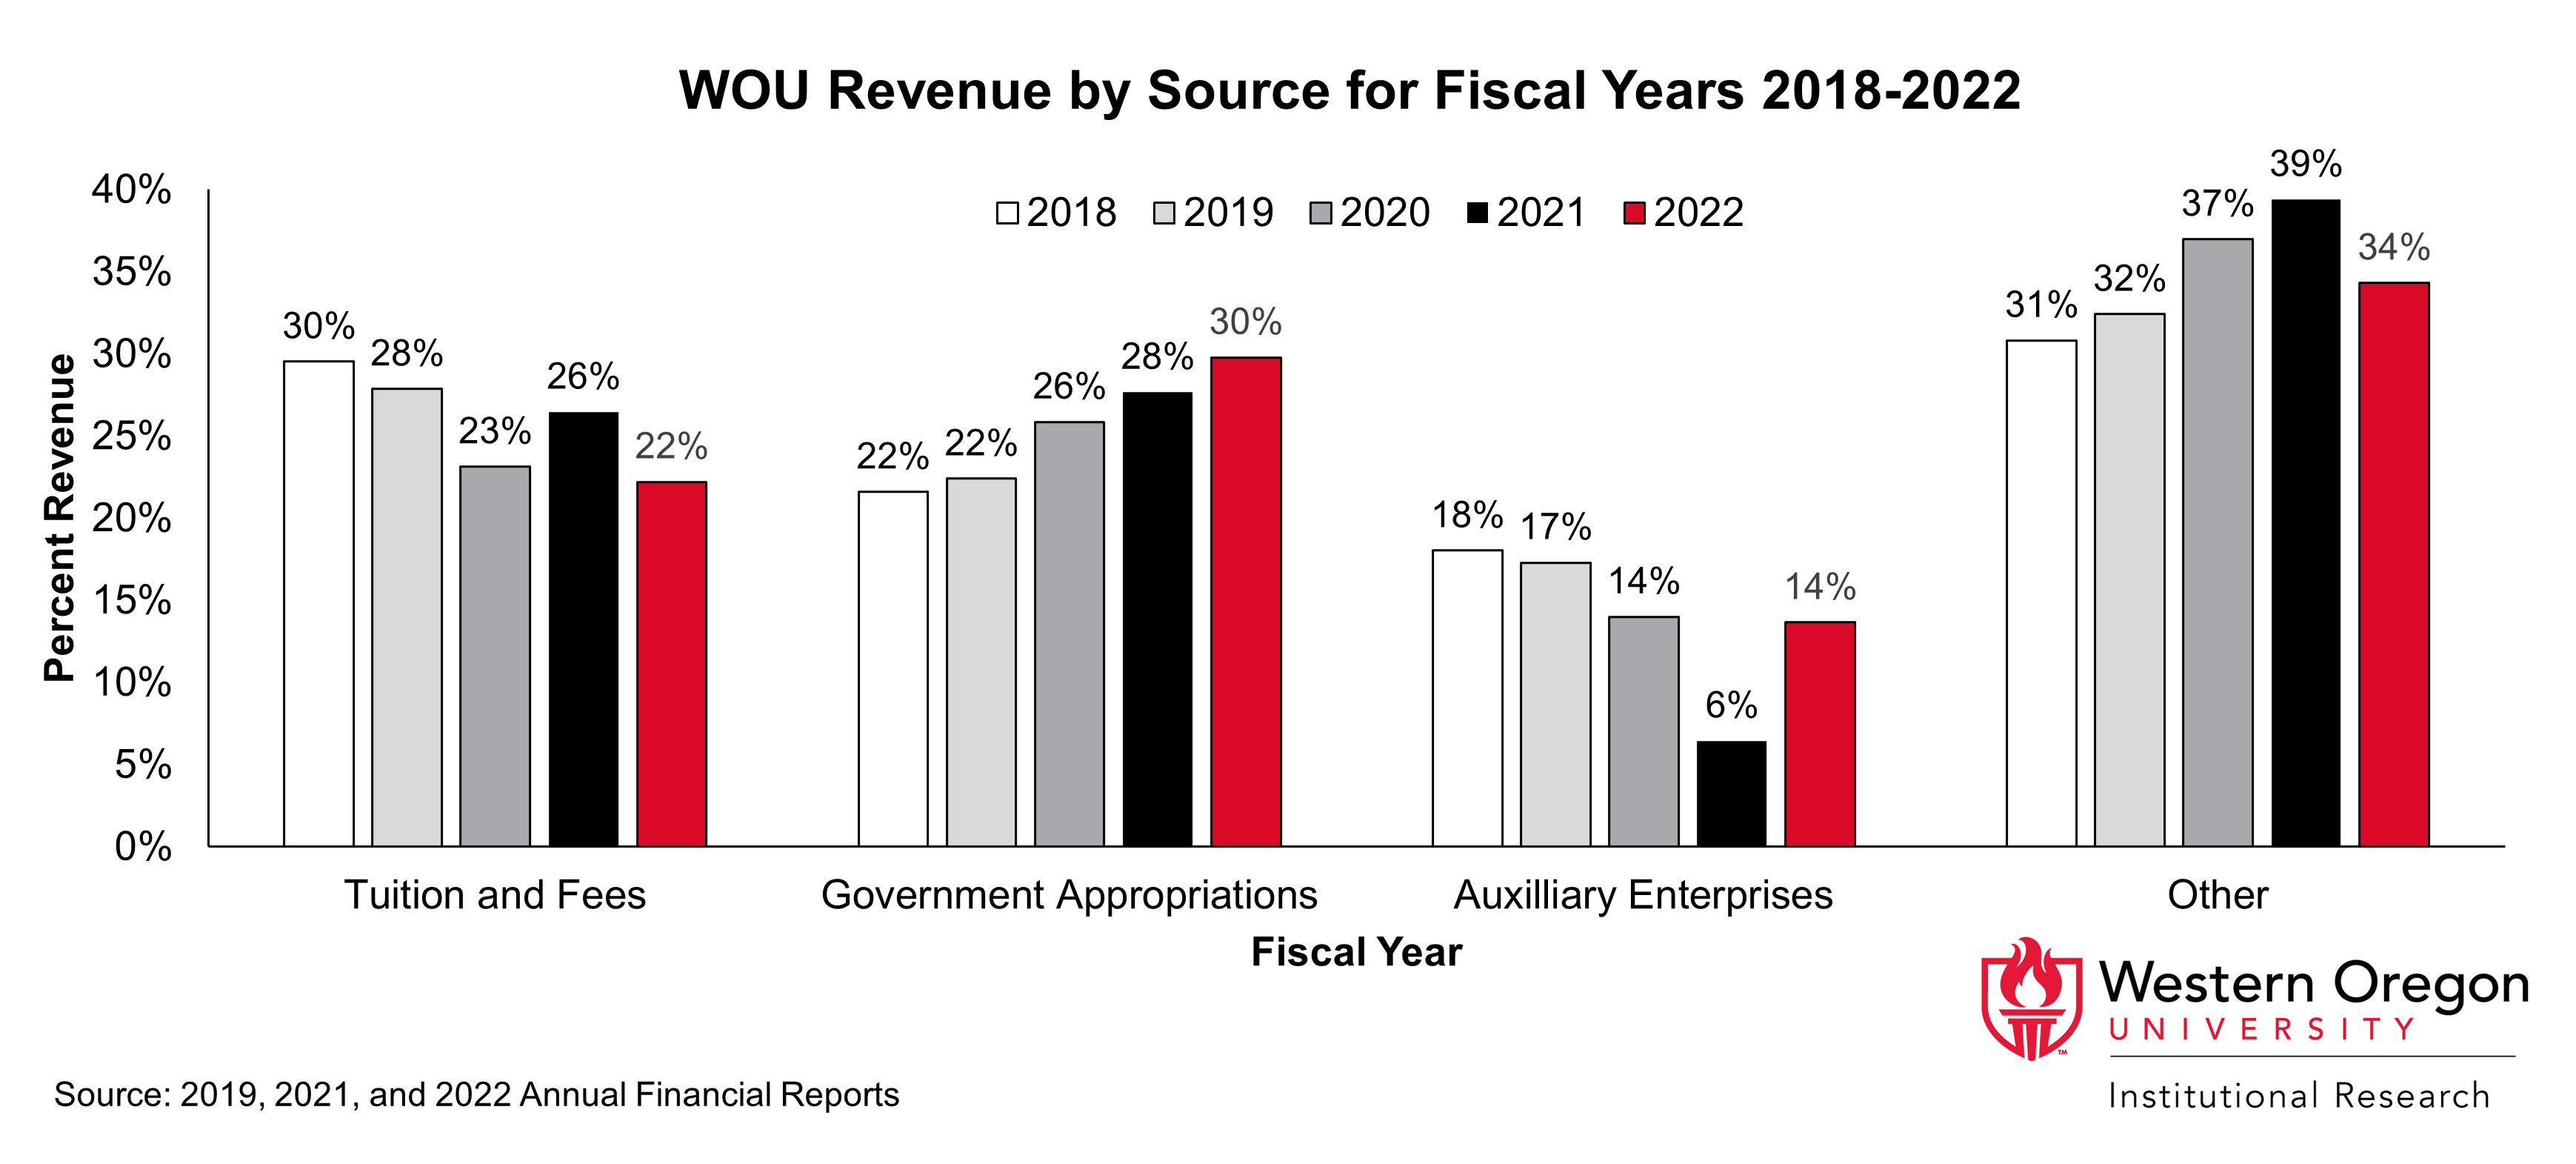 Bar graph of revenues at WOU py percentage since 2018, broken out by year and source, showing that the percent of revenue from tuition has been declining and the percent of revenue from government appropriations has been increasing.